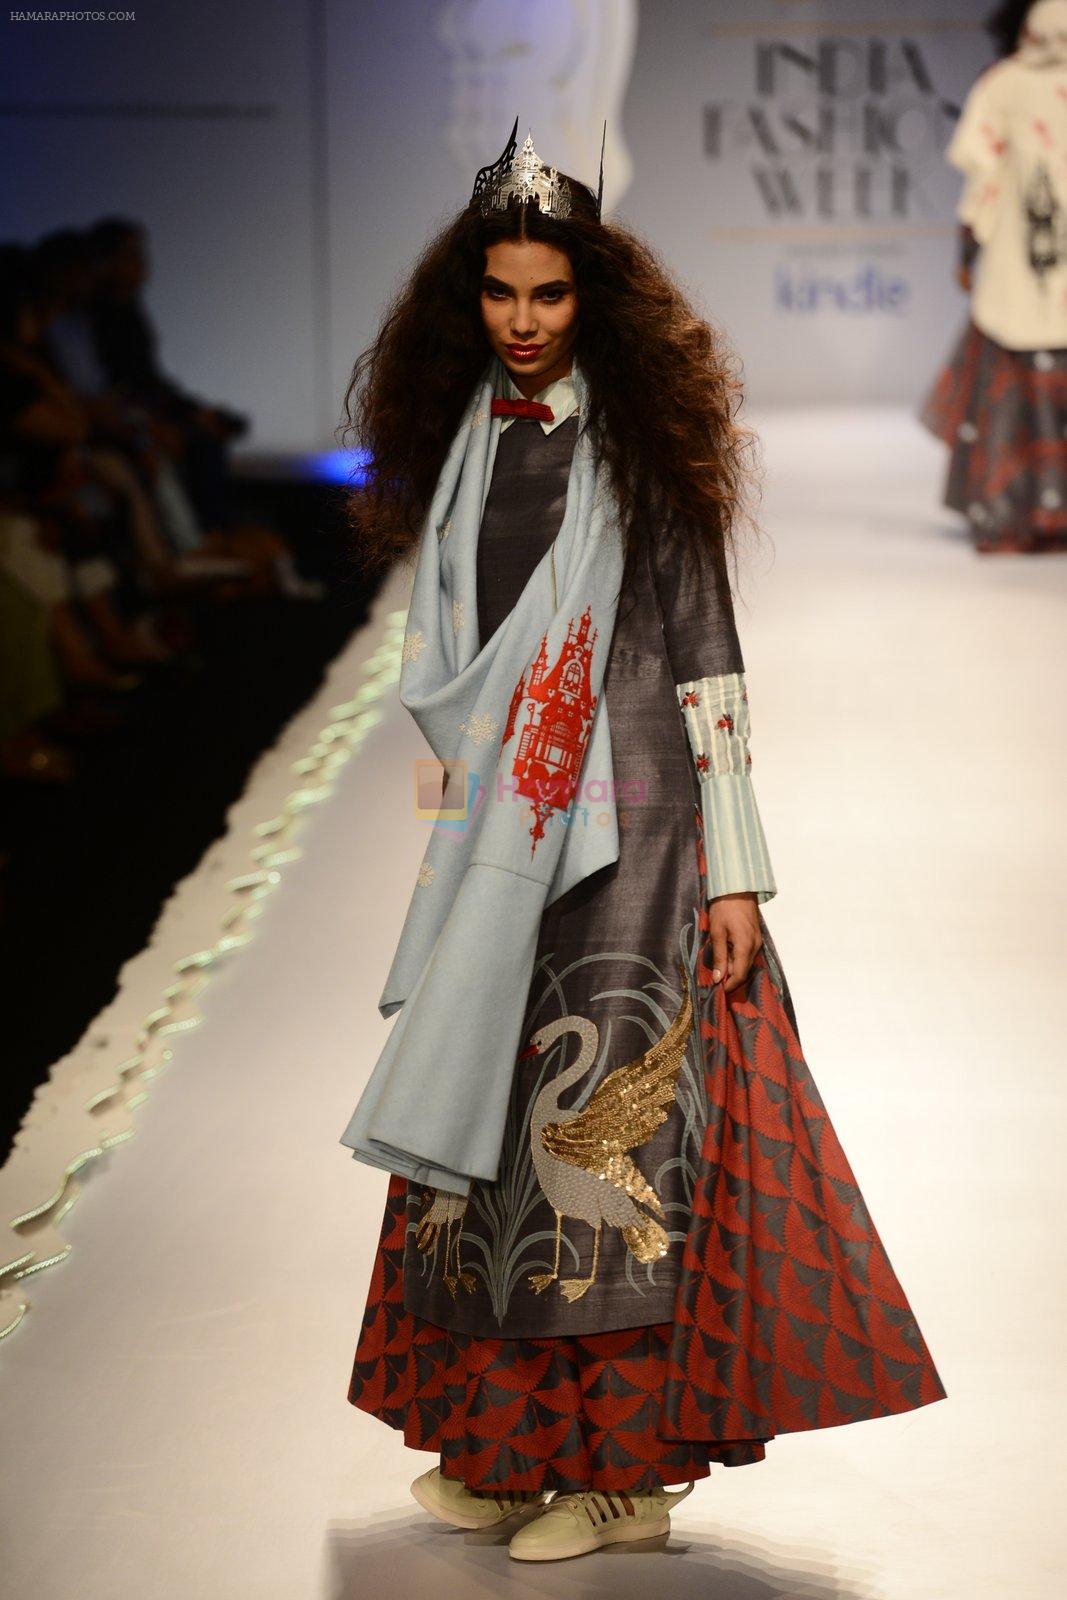 Model walk the ramp for Anju Modi on day 1 of Amazon India Fashion Week on 25th March 2015